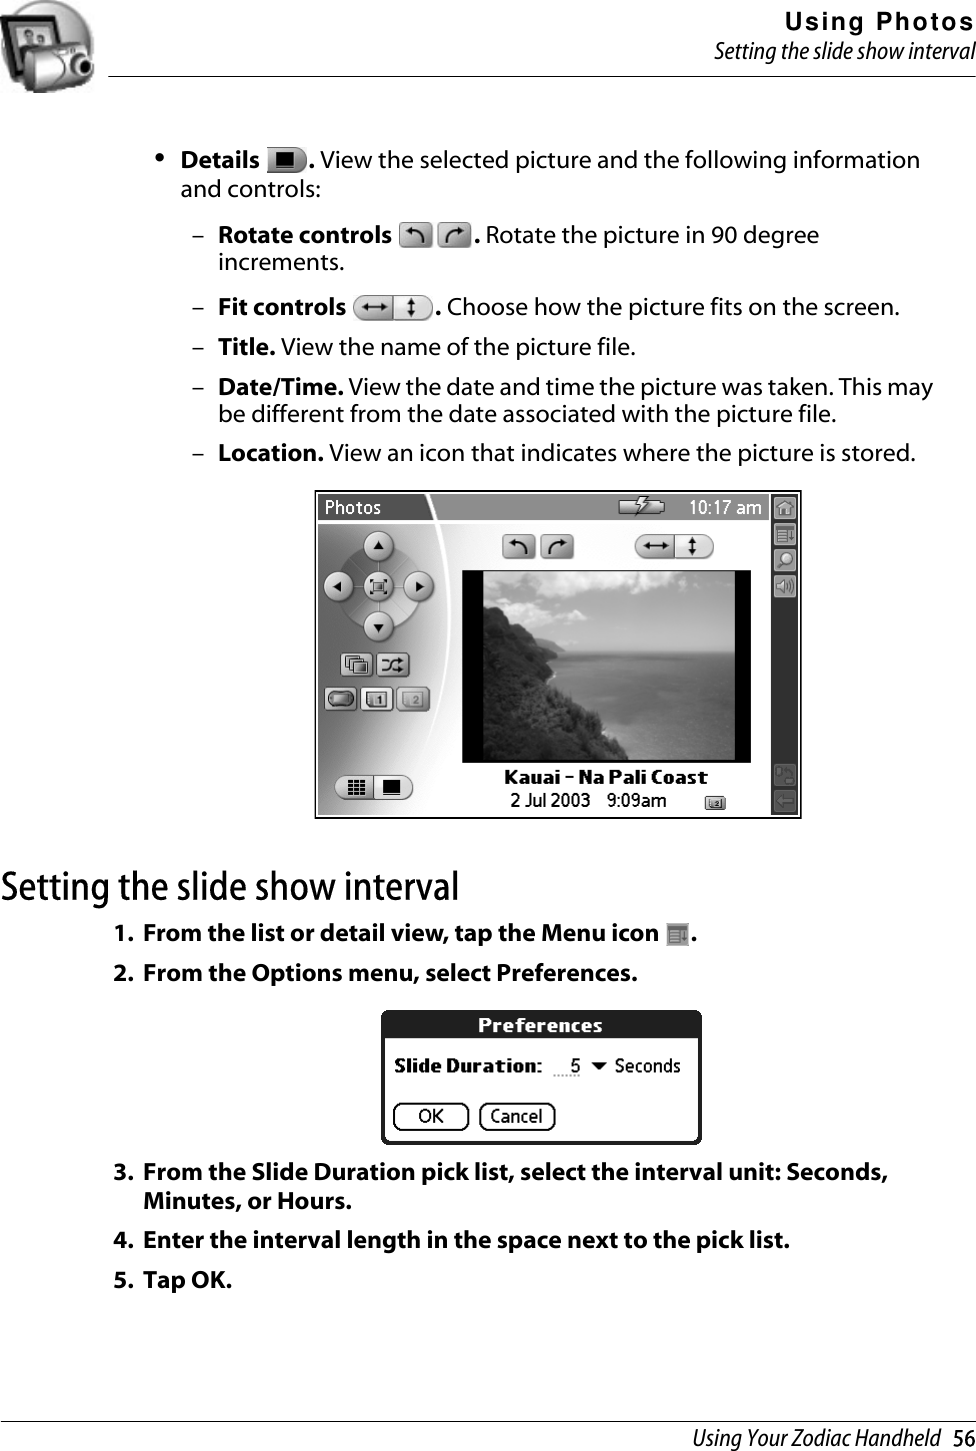 Using PhotosSetting the slide show intervalUsing Your Zodiac Handheld   56•Details  . View the selected picture and the following information and controls:–Rotate controls  . Rotate the picture in 90 degree increments.–Fit controls  . Choose how the picture fits on the screen.–Title. View the name of the picture file.–Date/Time. View the date and time the picture was taken. This may be different from the date associated with the picture file.–Location. View an icon that indicates where the picture is stored.Setting the slide show interval1. From the list or detail view, tap the Menu icon  .2. From the Options menu, select Preferences. 3. From the Slide Duration pick list, select the interval unit: Seconds, Minutes, or Hours.4. Enter the interval length in the space next to the pick list.5. Tap OK.